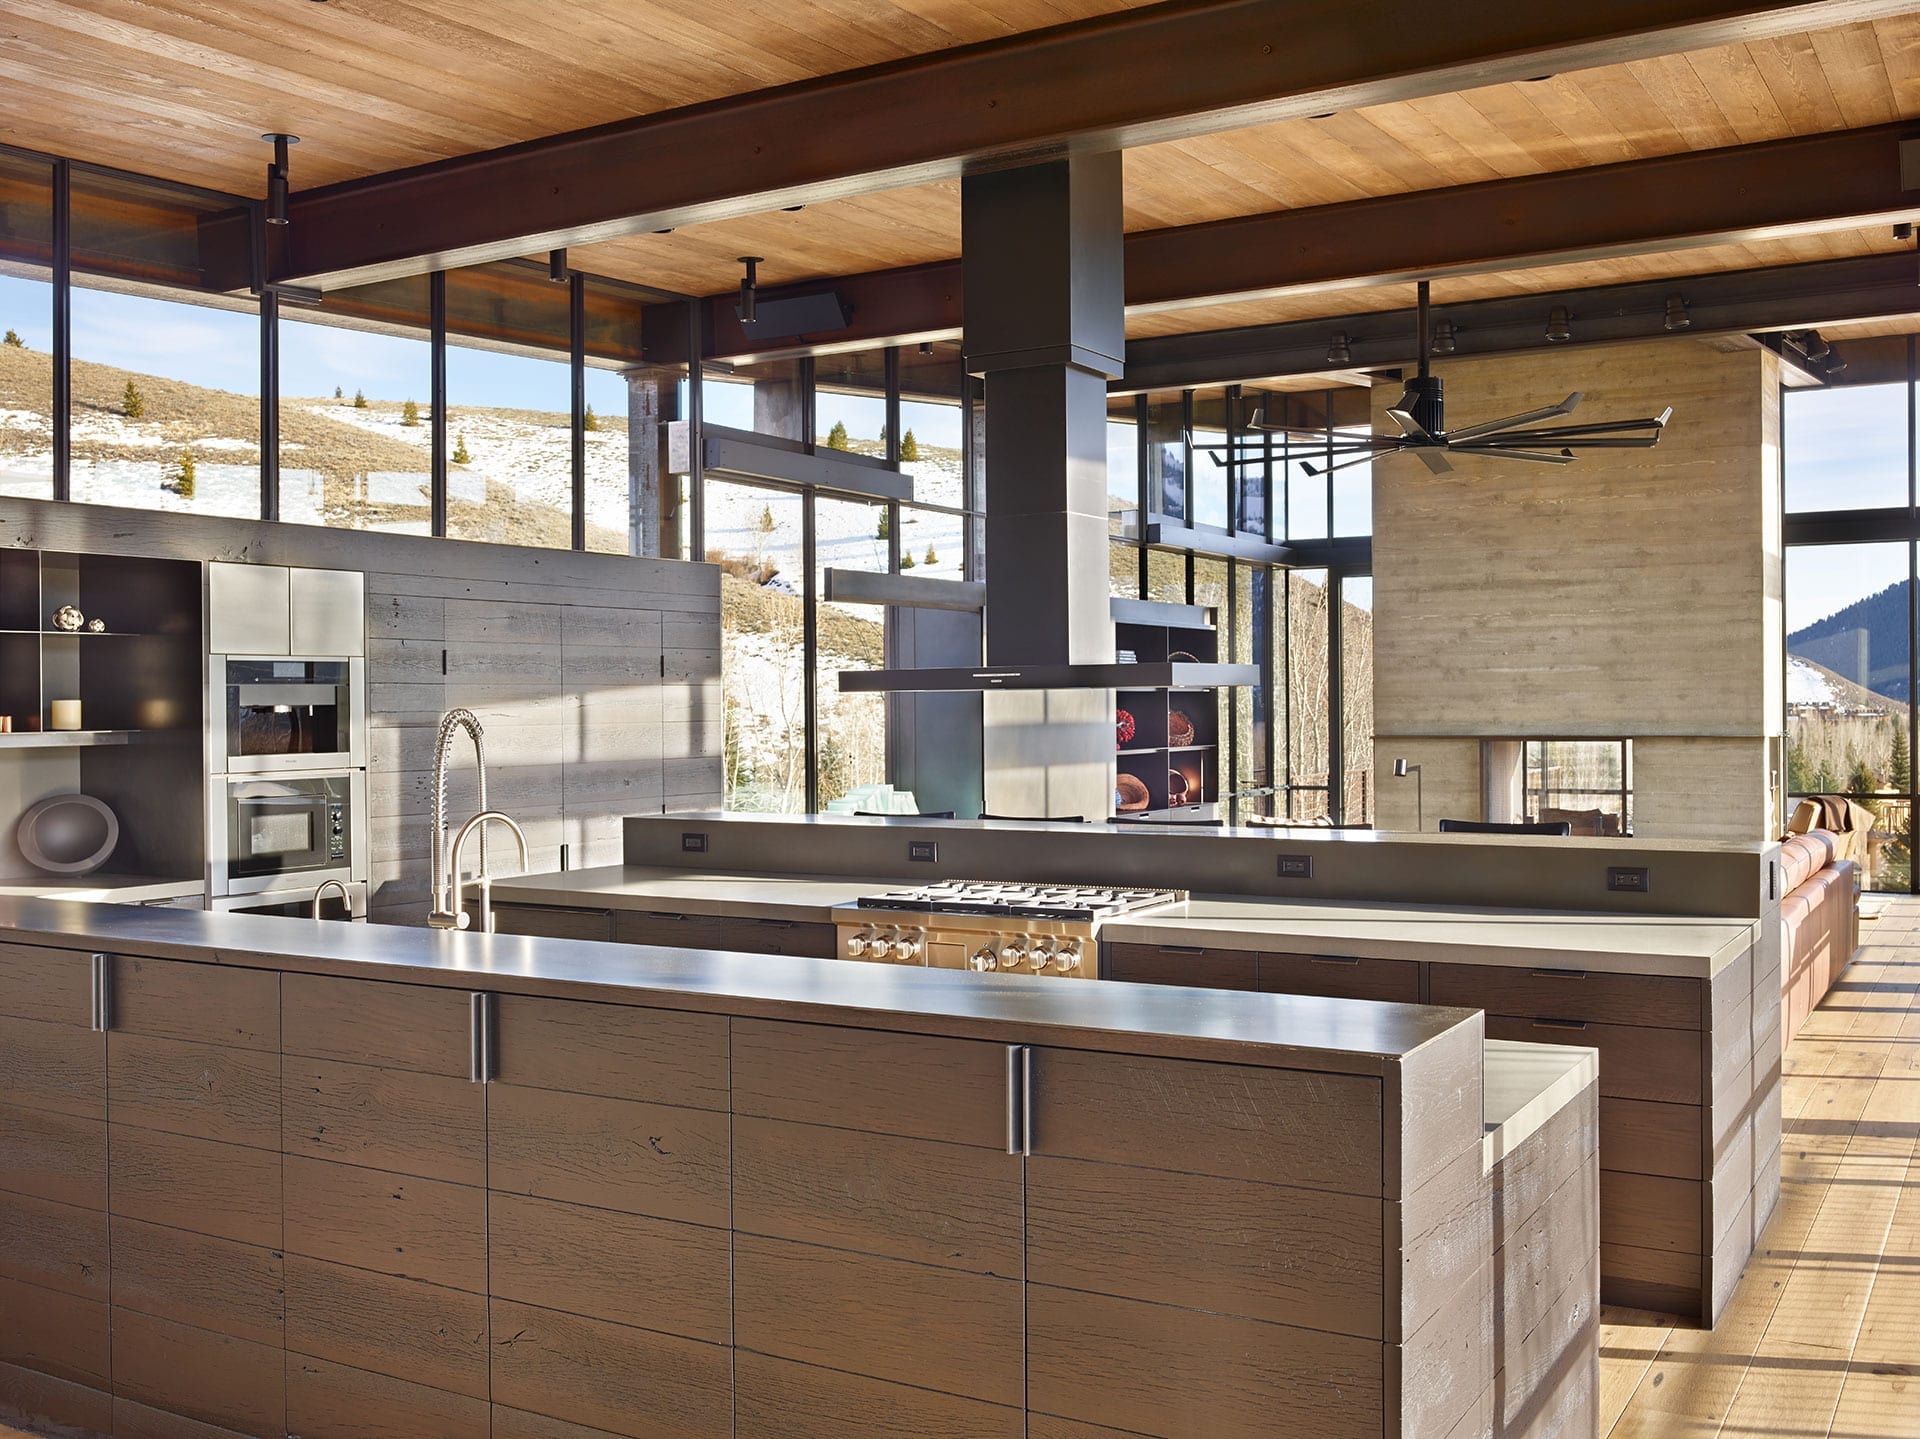 Modern kitchen with steel windows and mountain view in the background